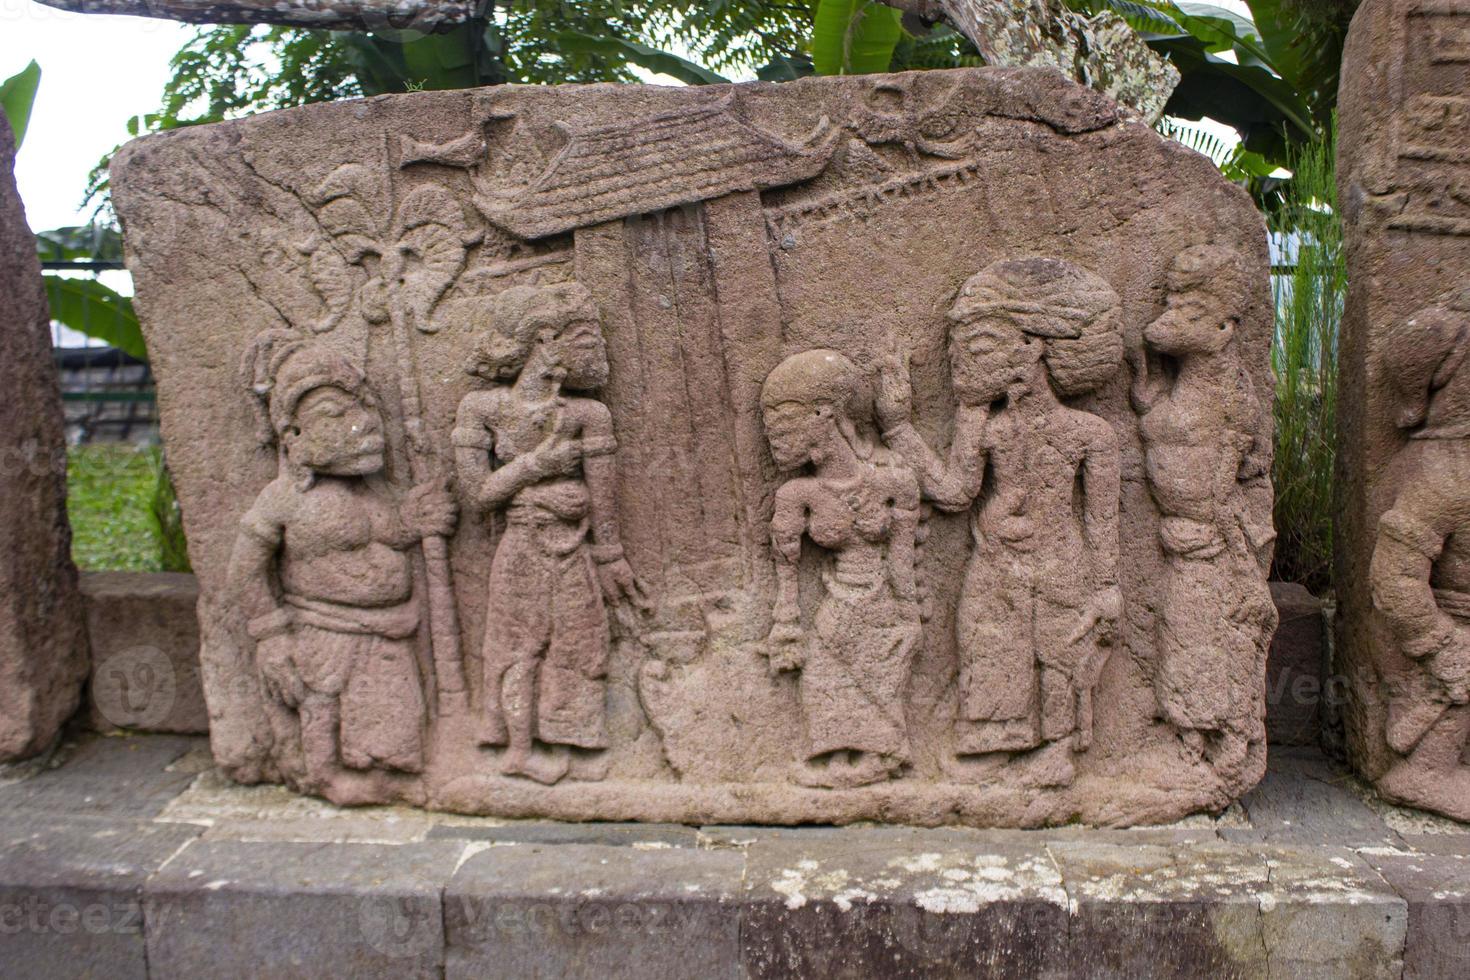 sukuh temple or candi sukuh, reliefs at sukuh temple.Ancient erotic Candi Sukuh-Hindu Temple on central Java, Indonesia. the temple is Javanese Hindu temple located mount lawu photo